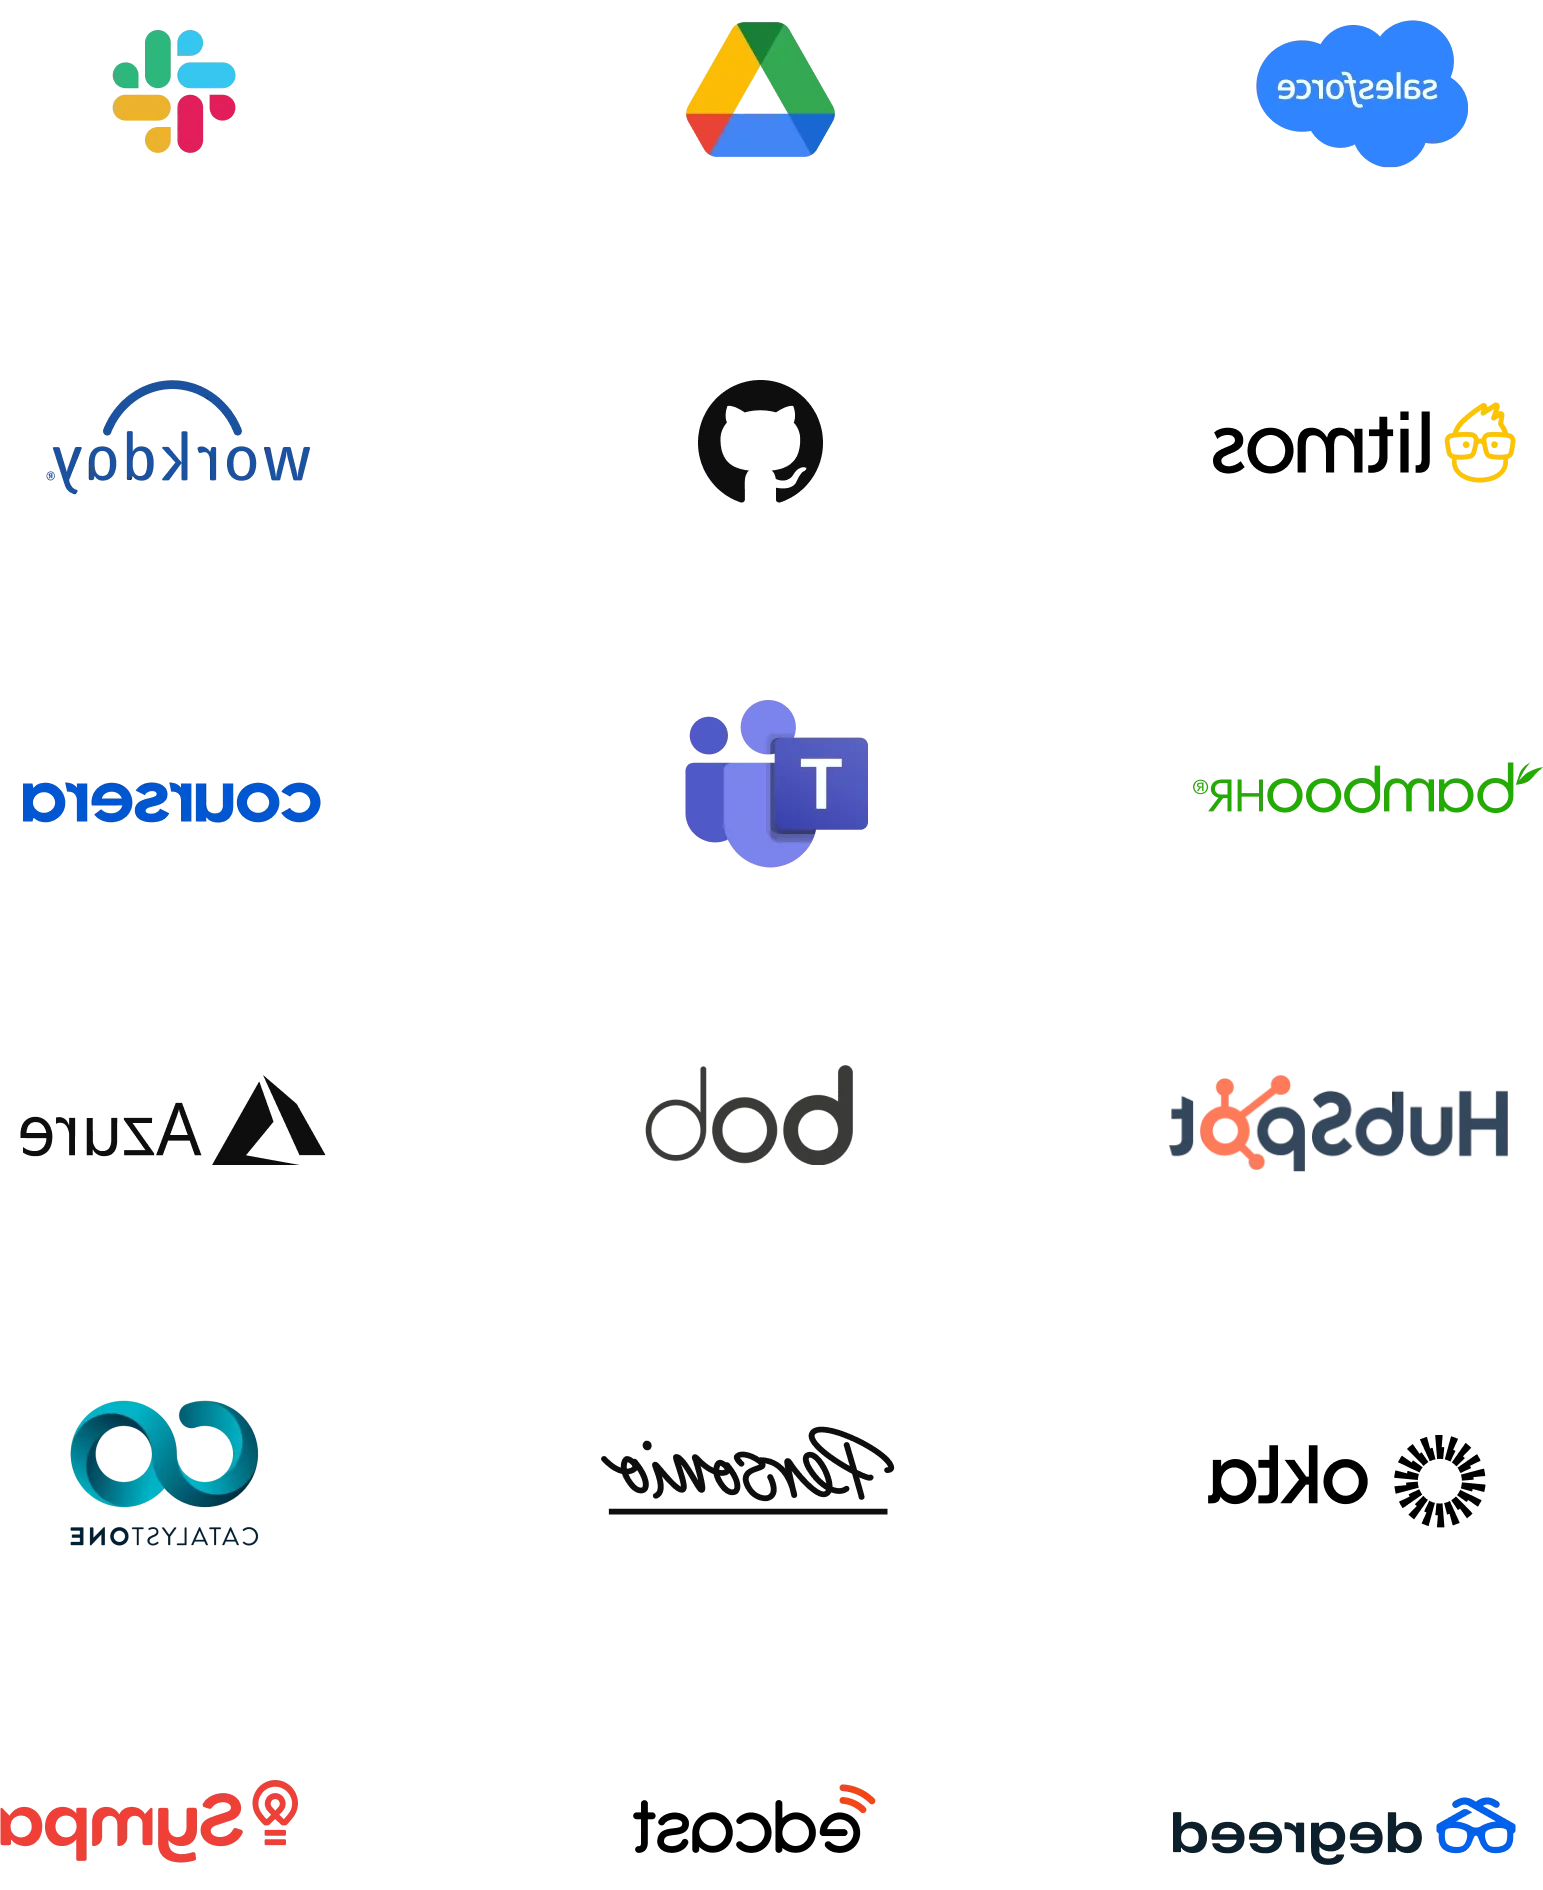 Collection of icons showing Sana's integrations.